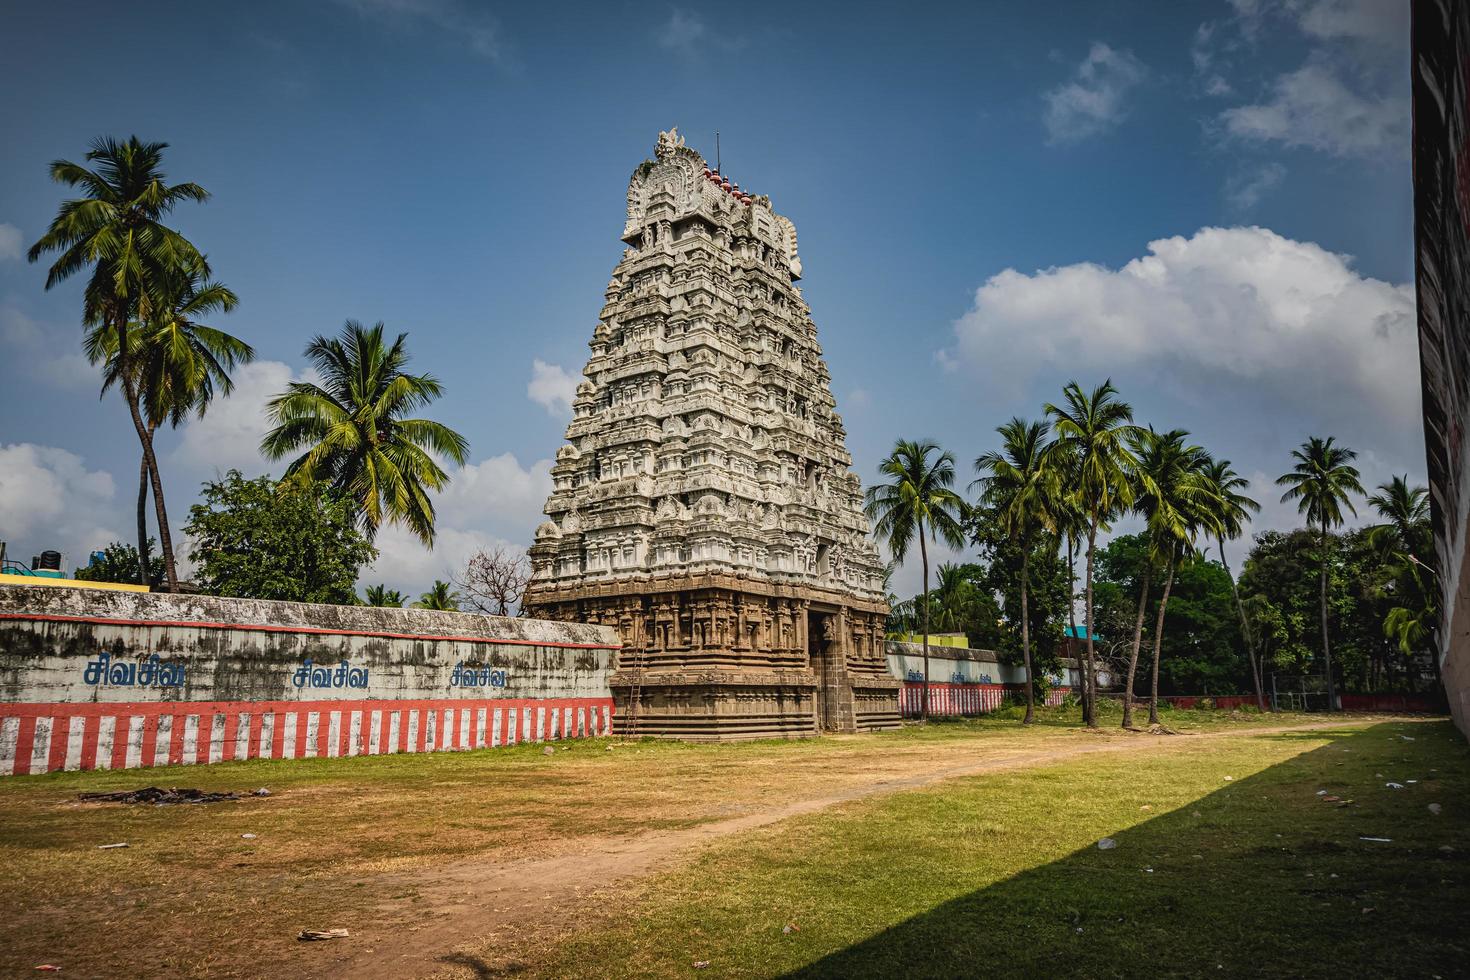 Thirukalukundram is known for the Vedagiriswarar temple complex, popularly known as Kazhugu koil - Eagle temple. This temple consists of two structures, one at foot-hill and the other at top-hill photo